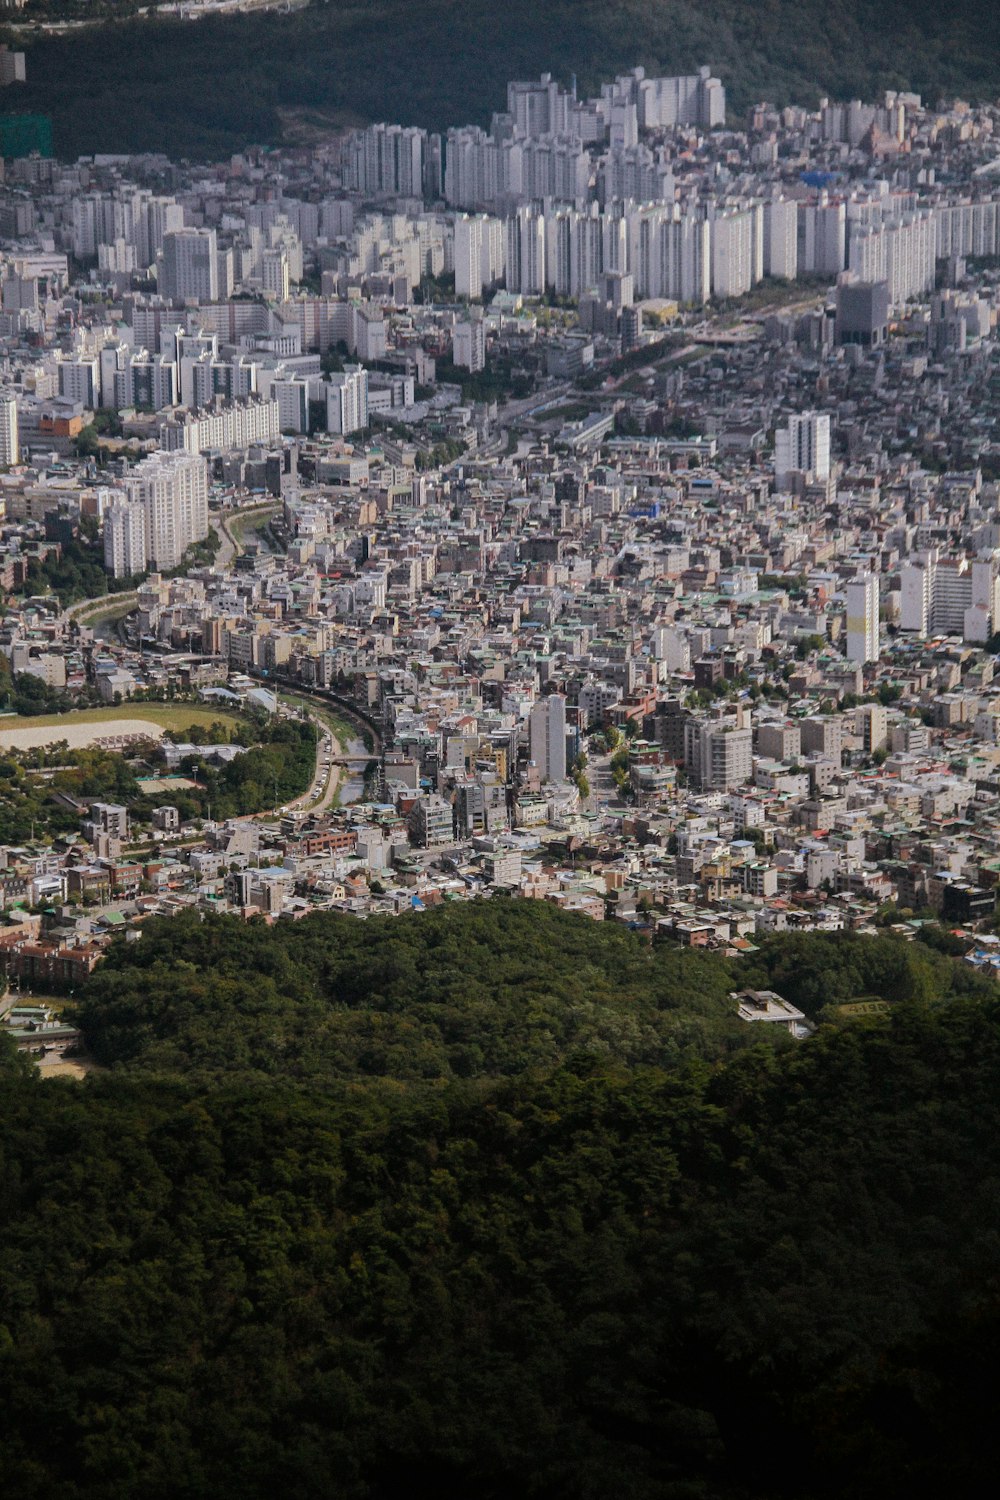 an aerial view of a large city with lots of tall buildings